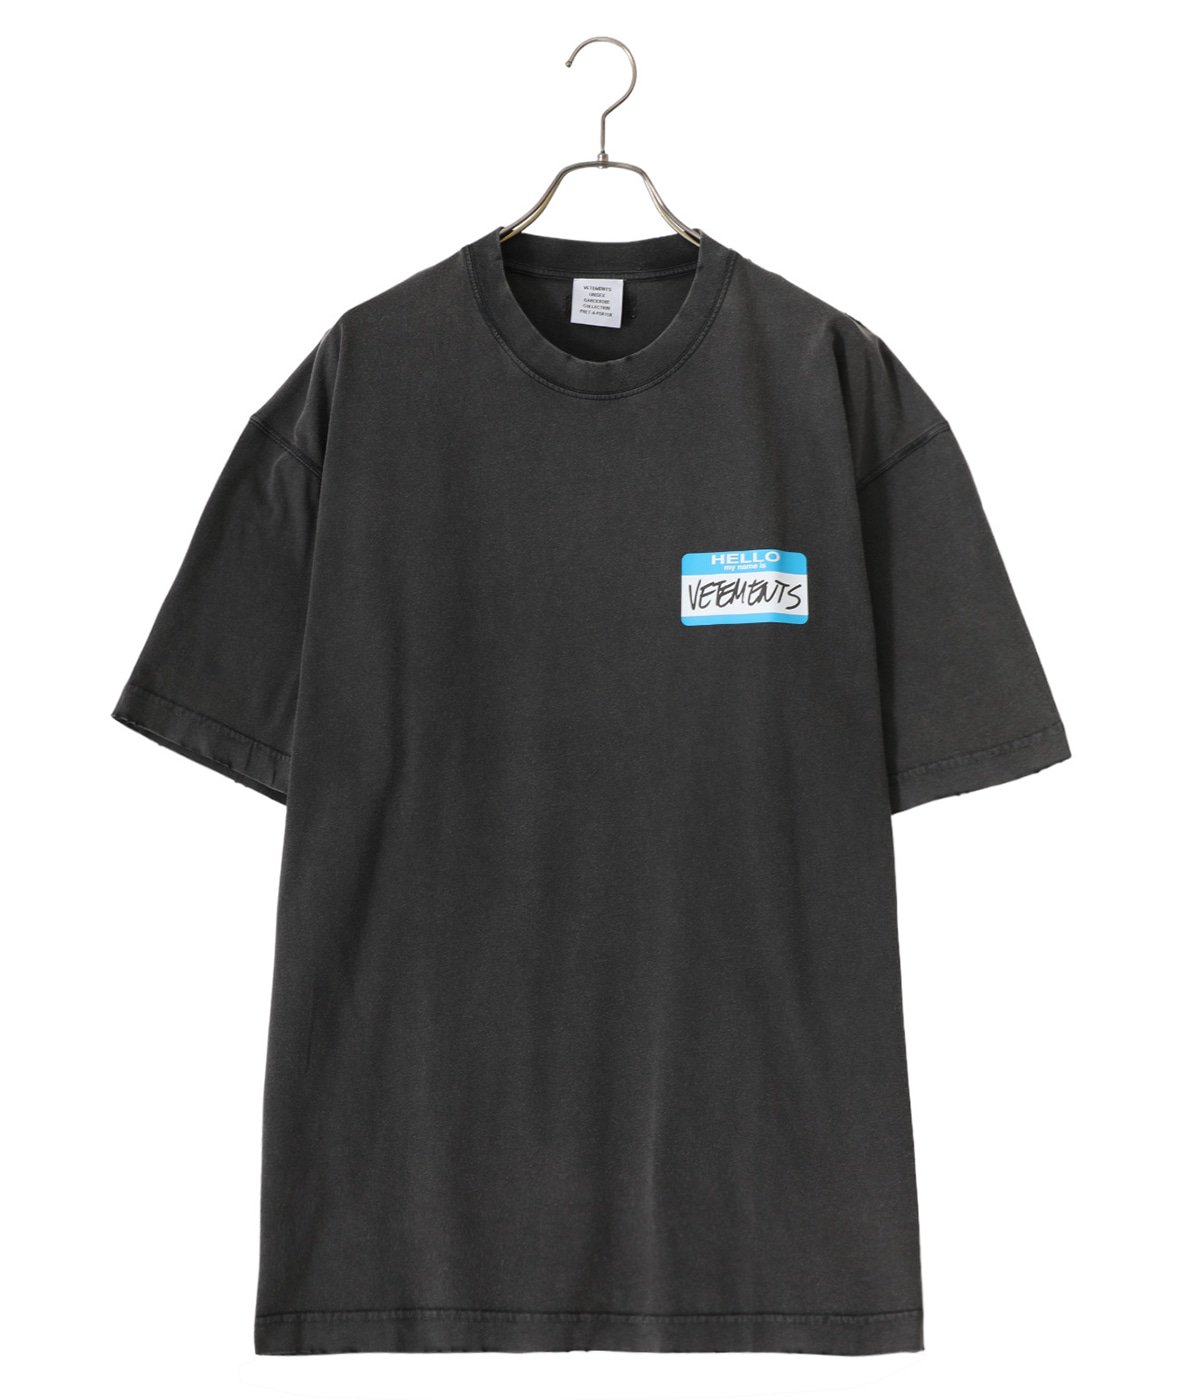 MY NAME IS VETEMENTS FADED T-SHIRT VETEMENTS(ヴェトモン) トップス カットソー半袖・Tシャツ メンズ)の通販 ARKnets(アークネッツ) 公式通販 【正規取扱店】